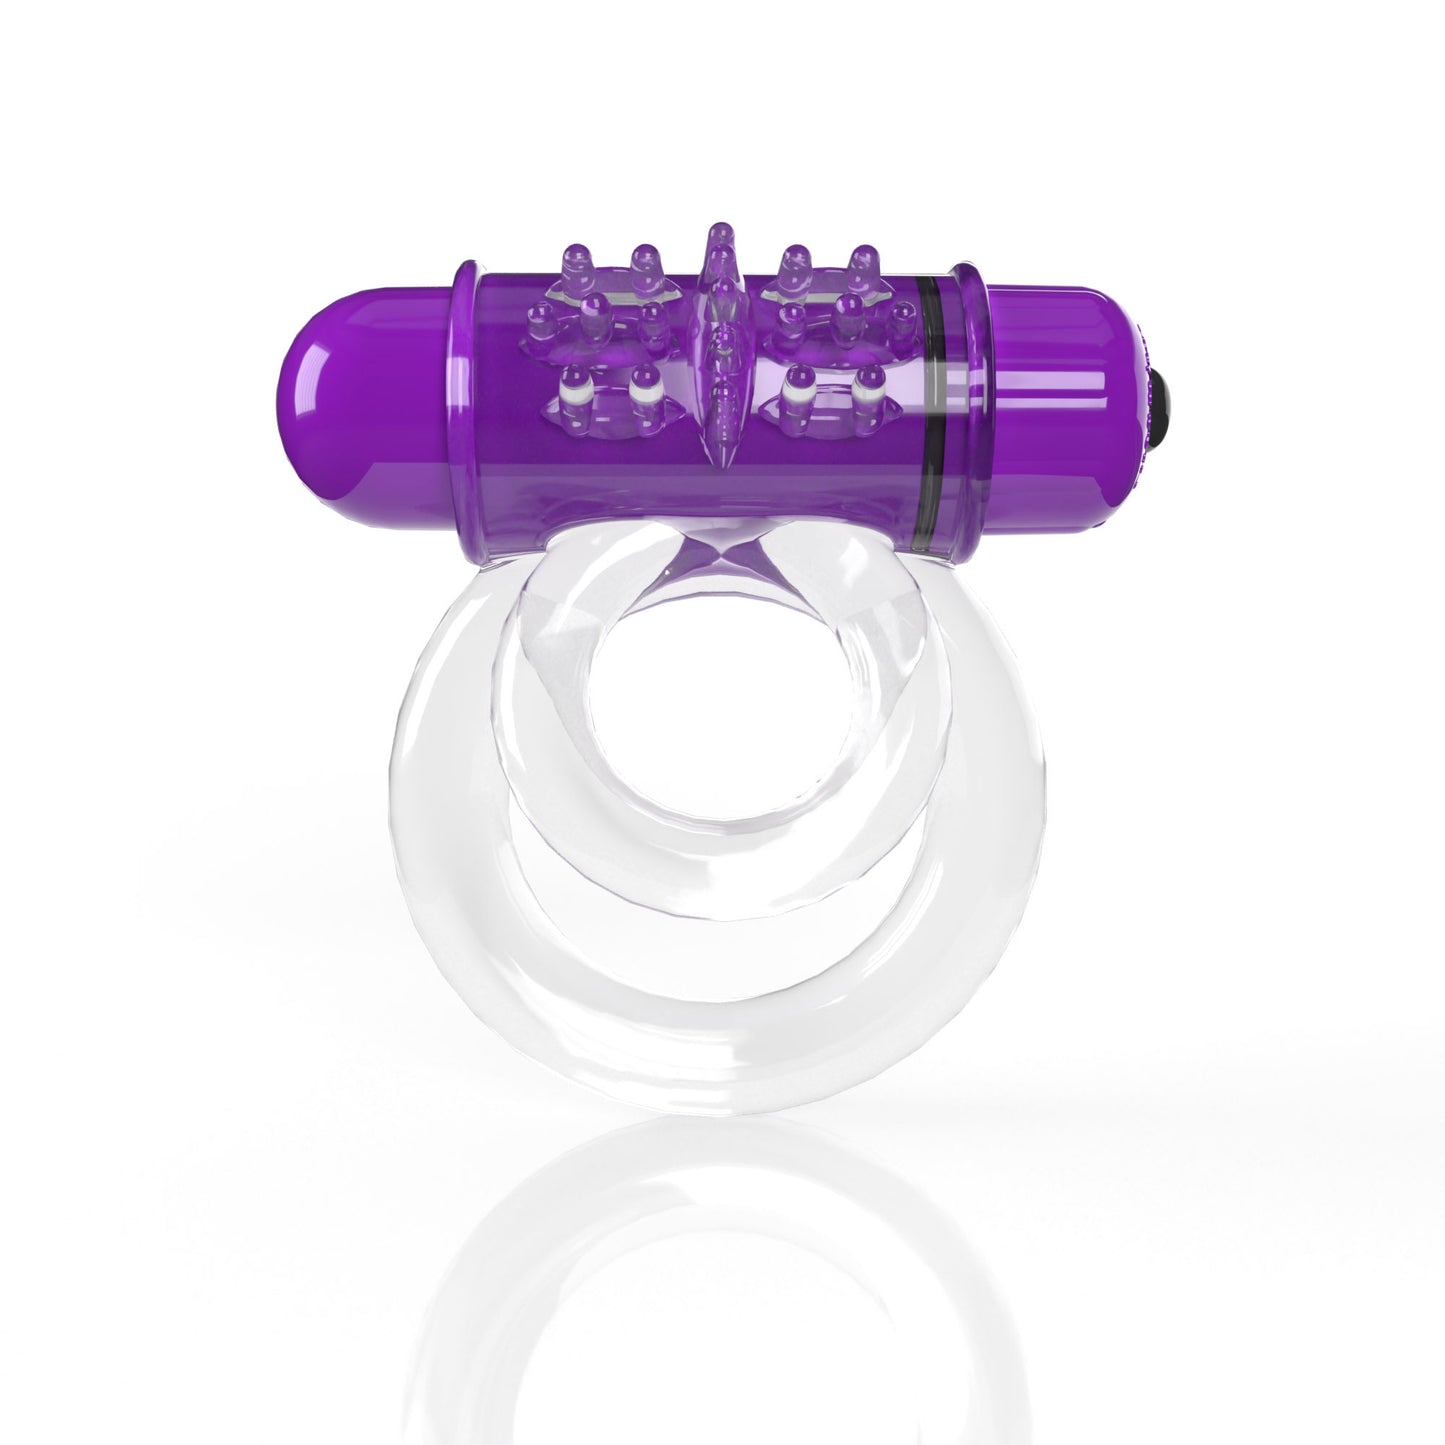 Screaming O 4t - Double O 6 Super Powered   Vibrating Double Ring - All Flavors